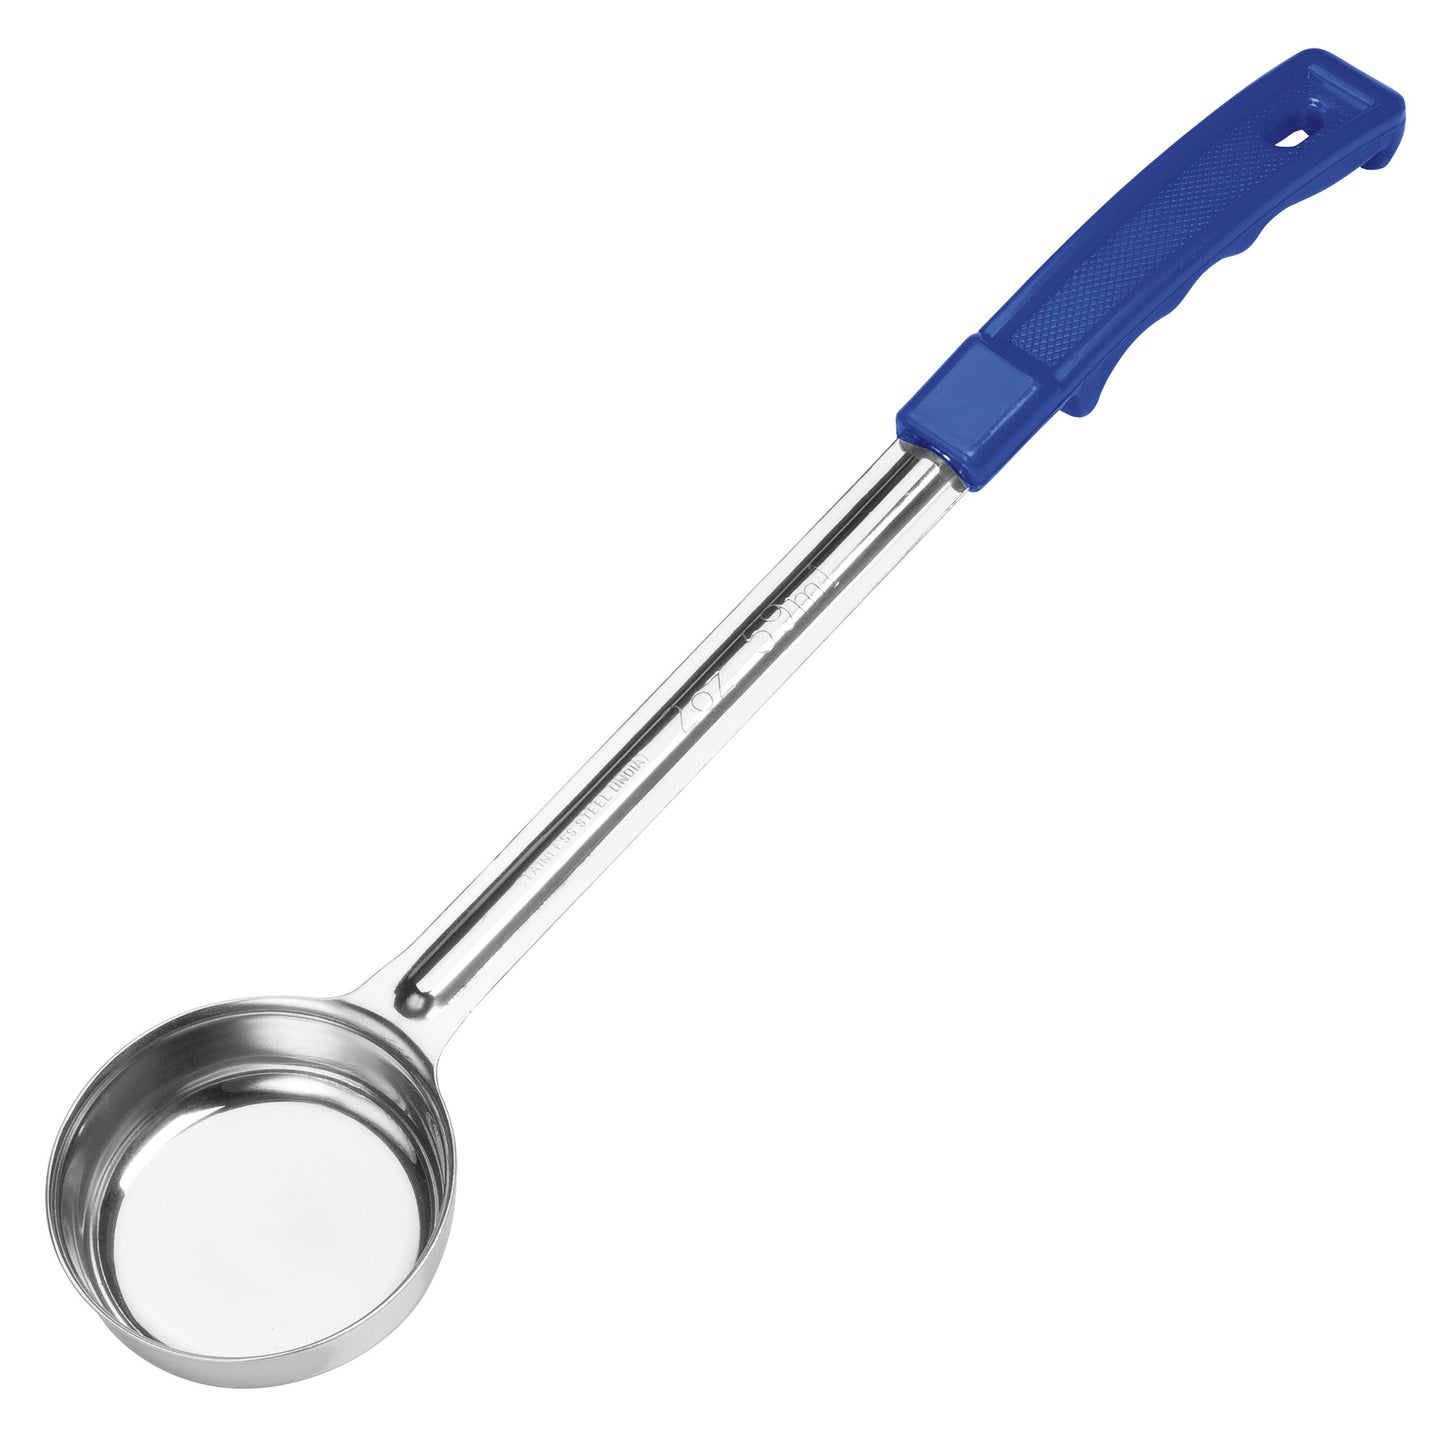 FPSN-2 - Winco Prime One-Piece Stainless Steel Portioners - Solid, 2 oz